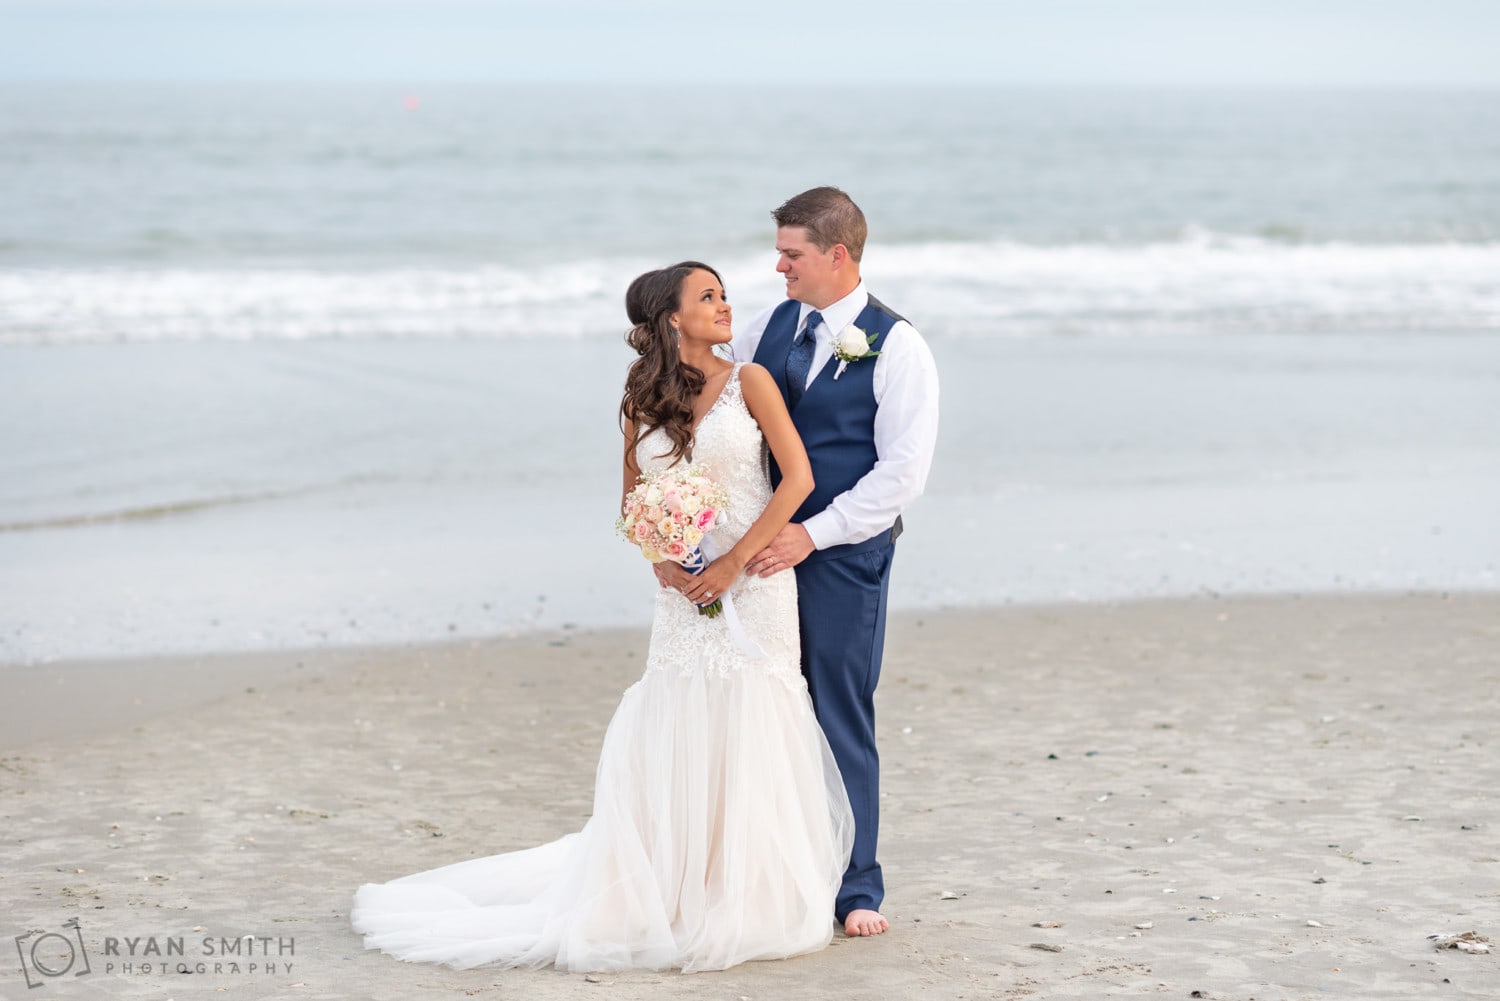 Traditional pose with groom standing behind the bride - Avista Resort - North Myrtle Beach